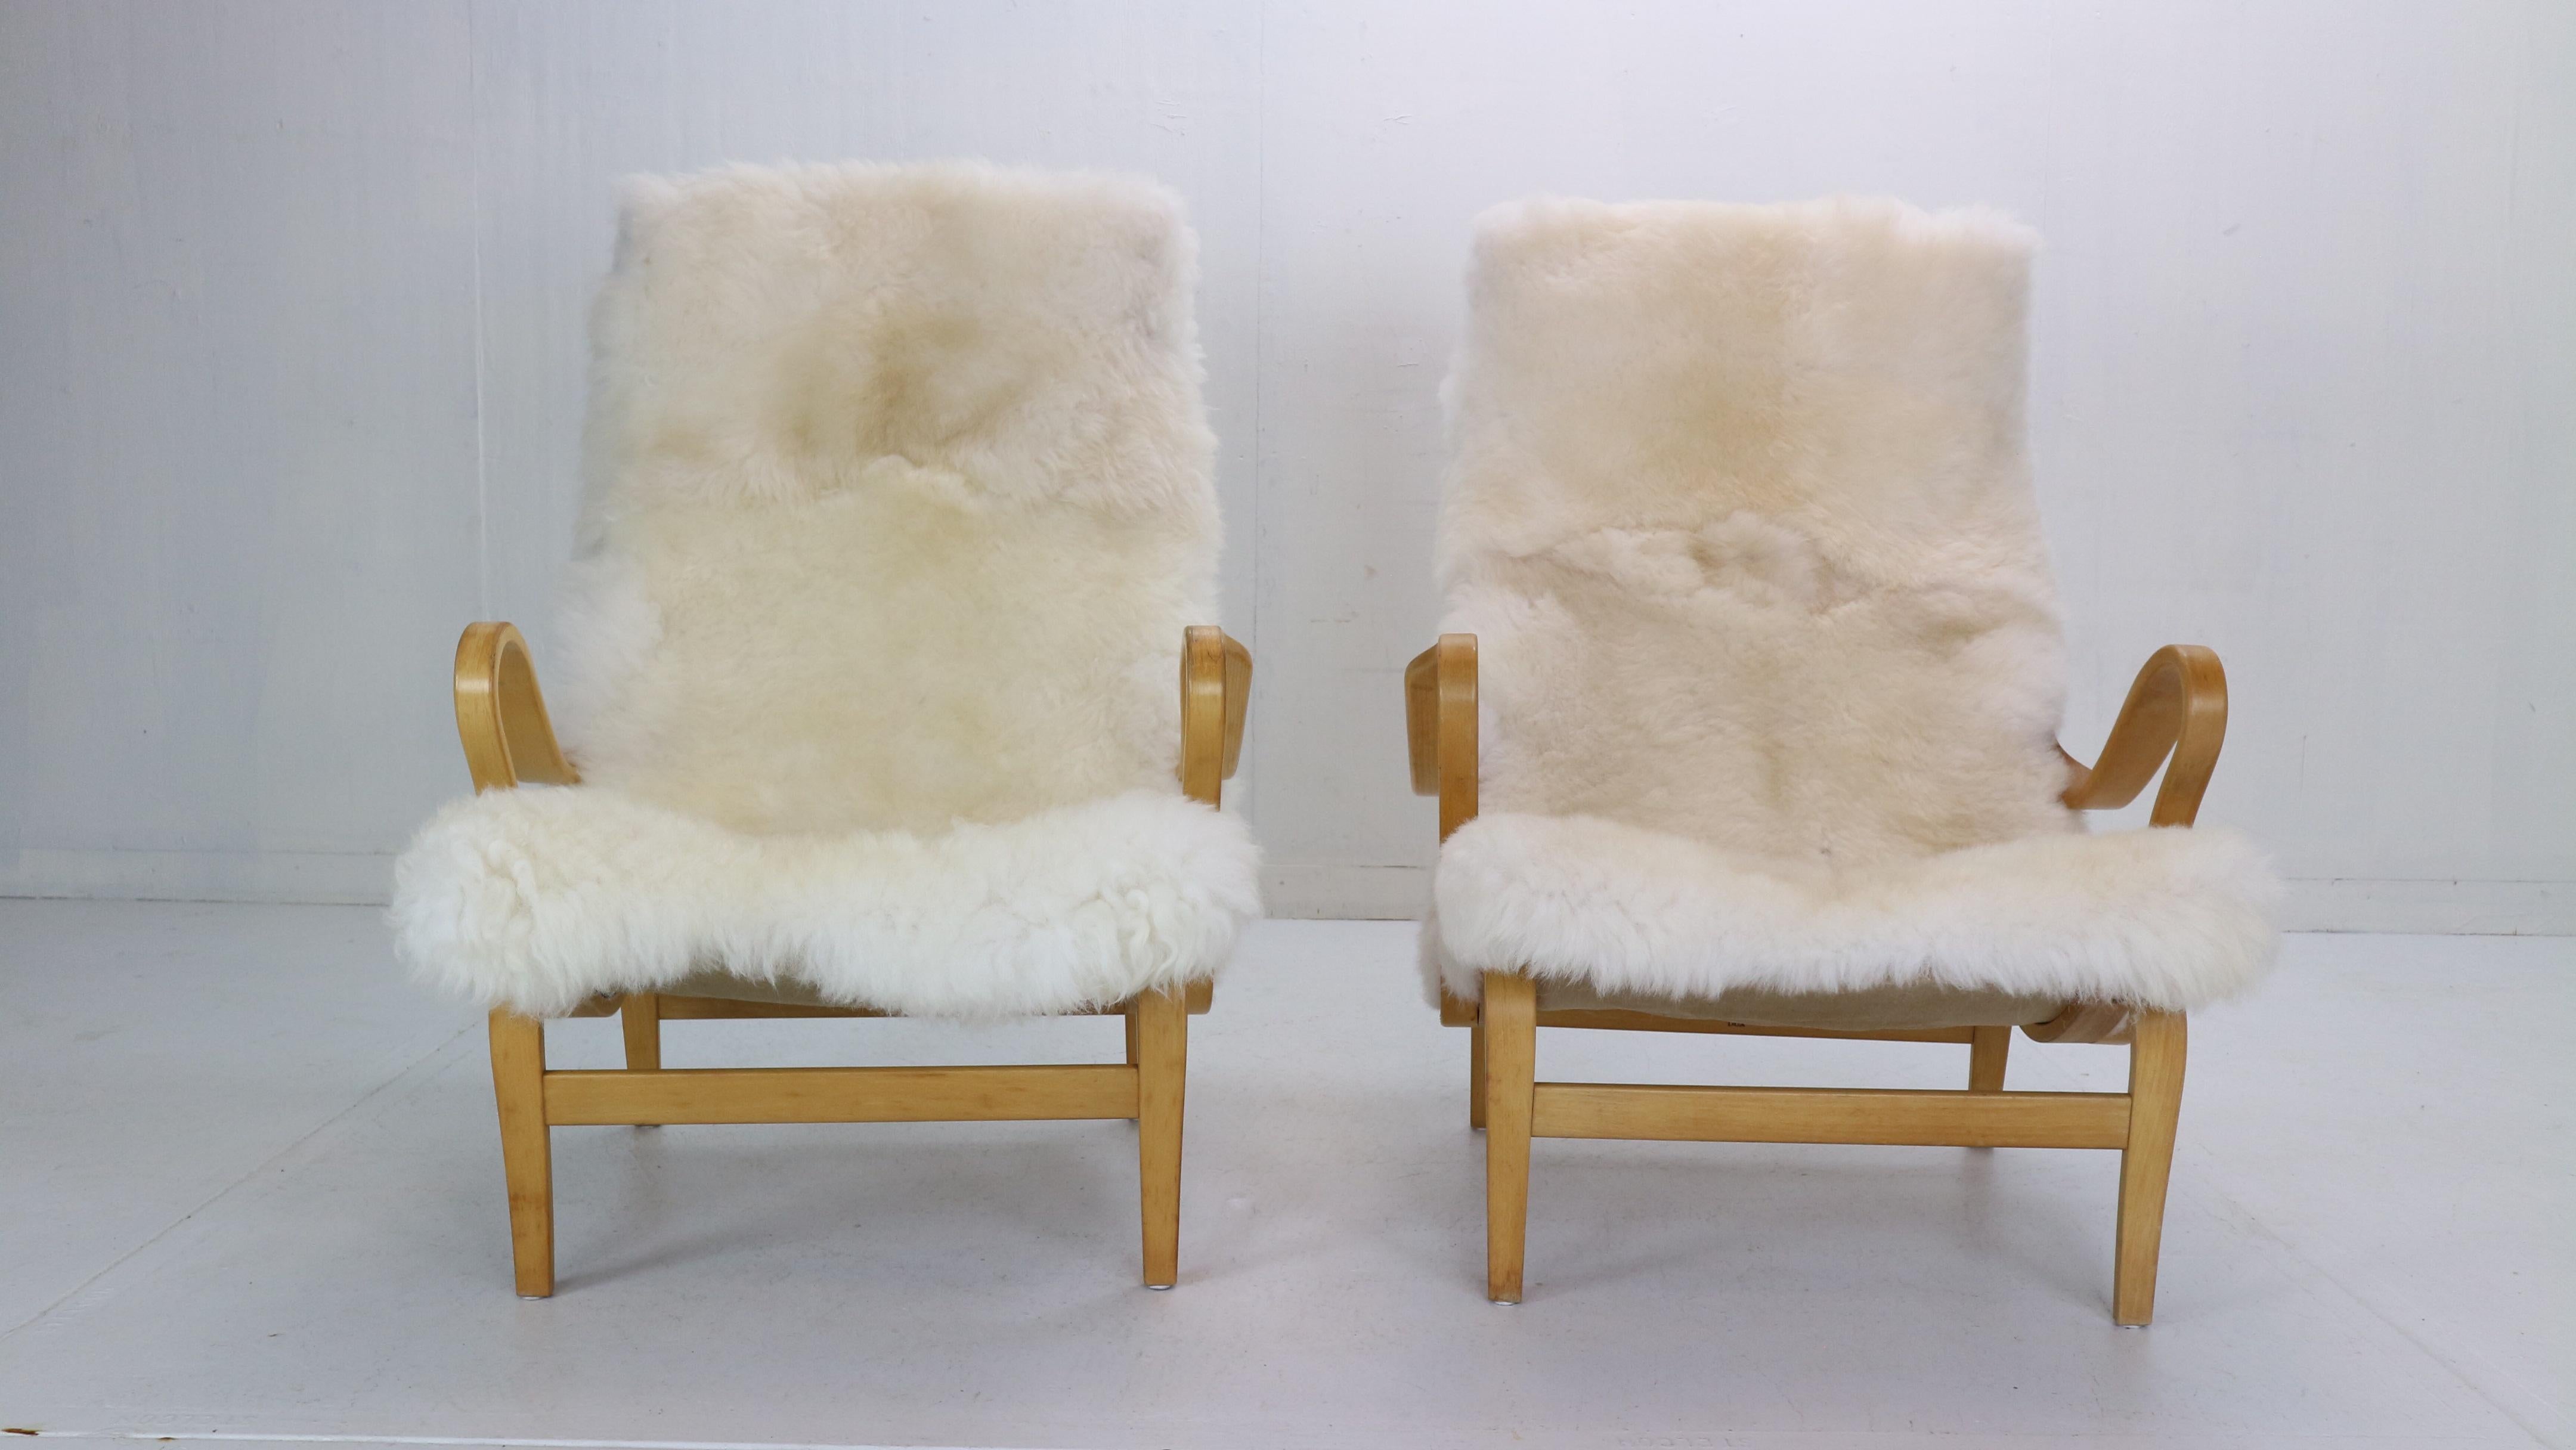 Set of two lounge chairs designed by Bruno Mathsson and manufactured by DUX in 1969, Sweden.
“Pernilla” series of chairs incorporate dramatically flowing bent beechwood frames, making them some of the most instantly recognisable works of